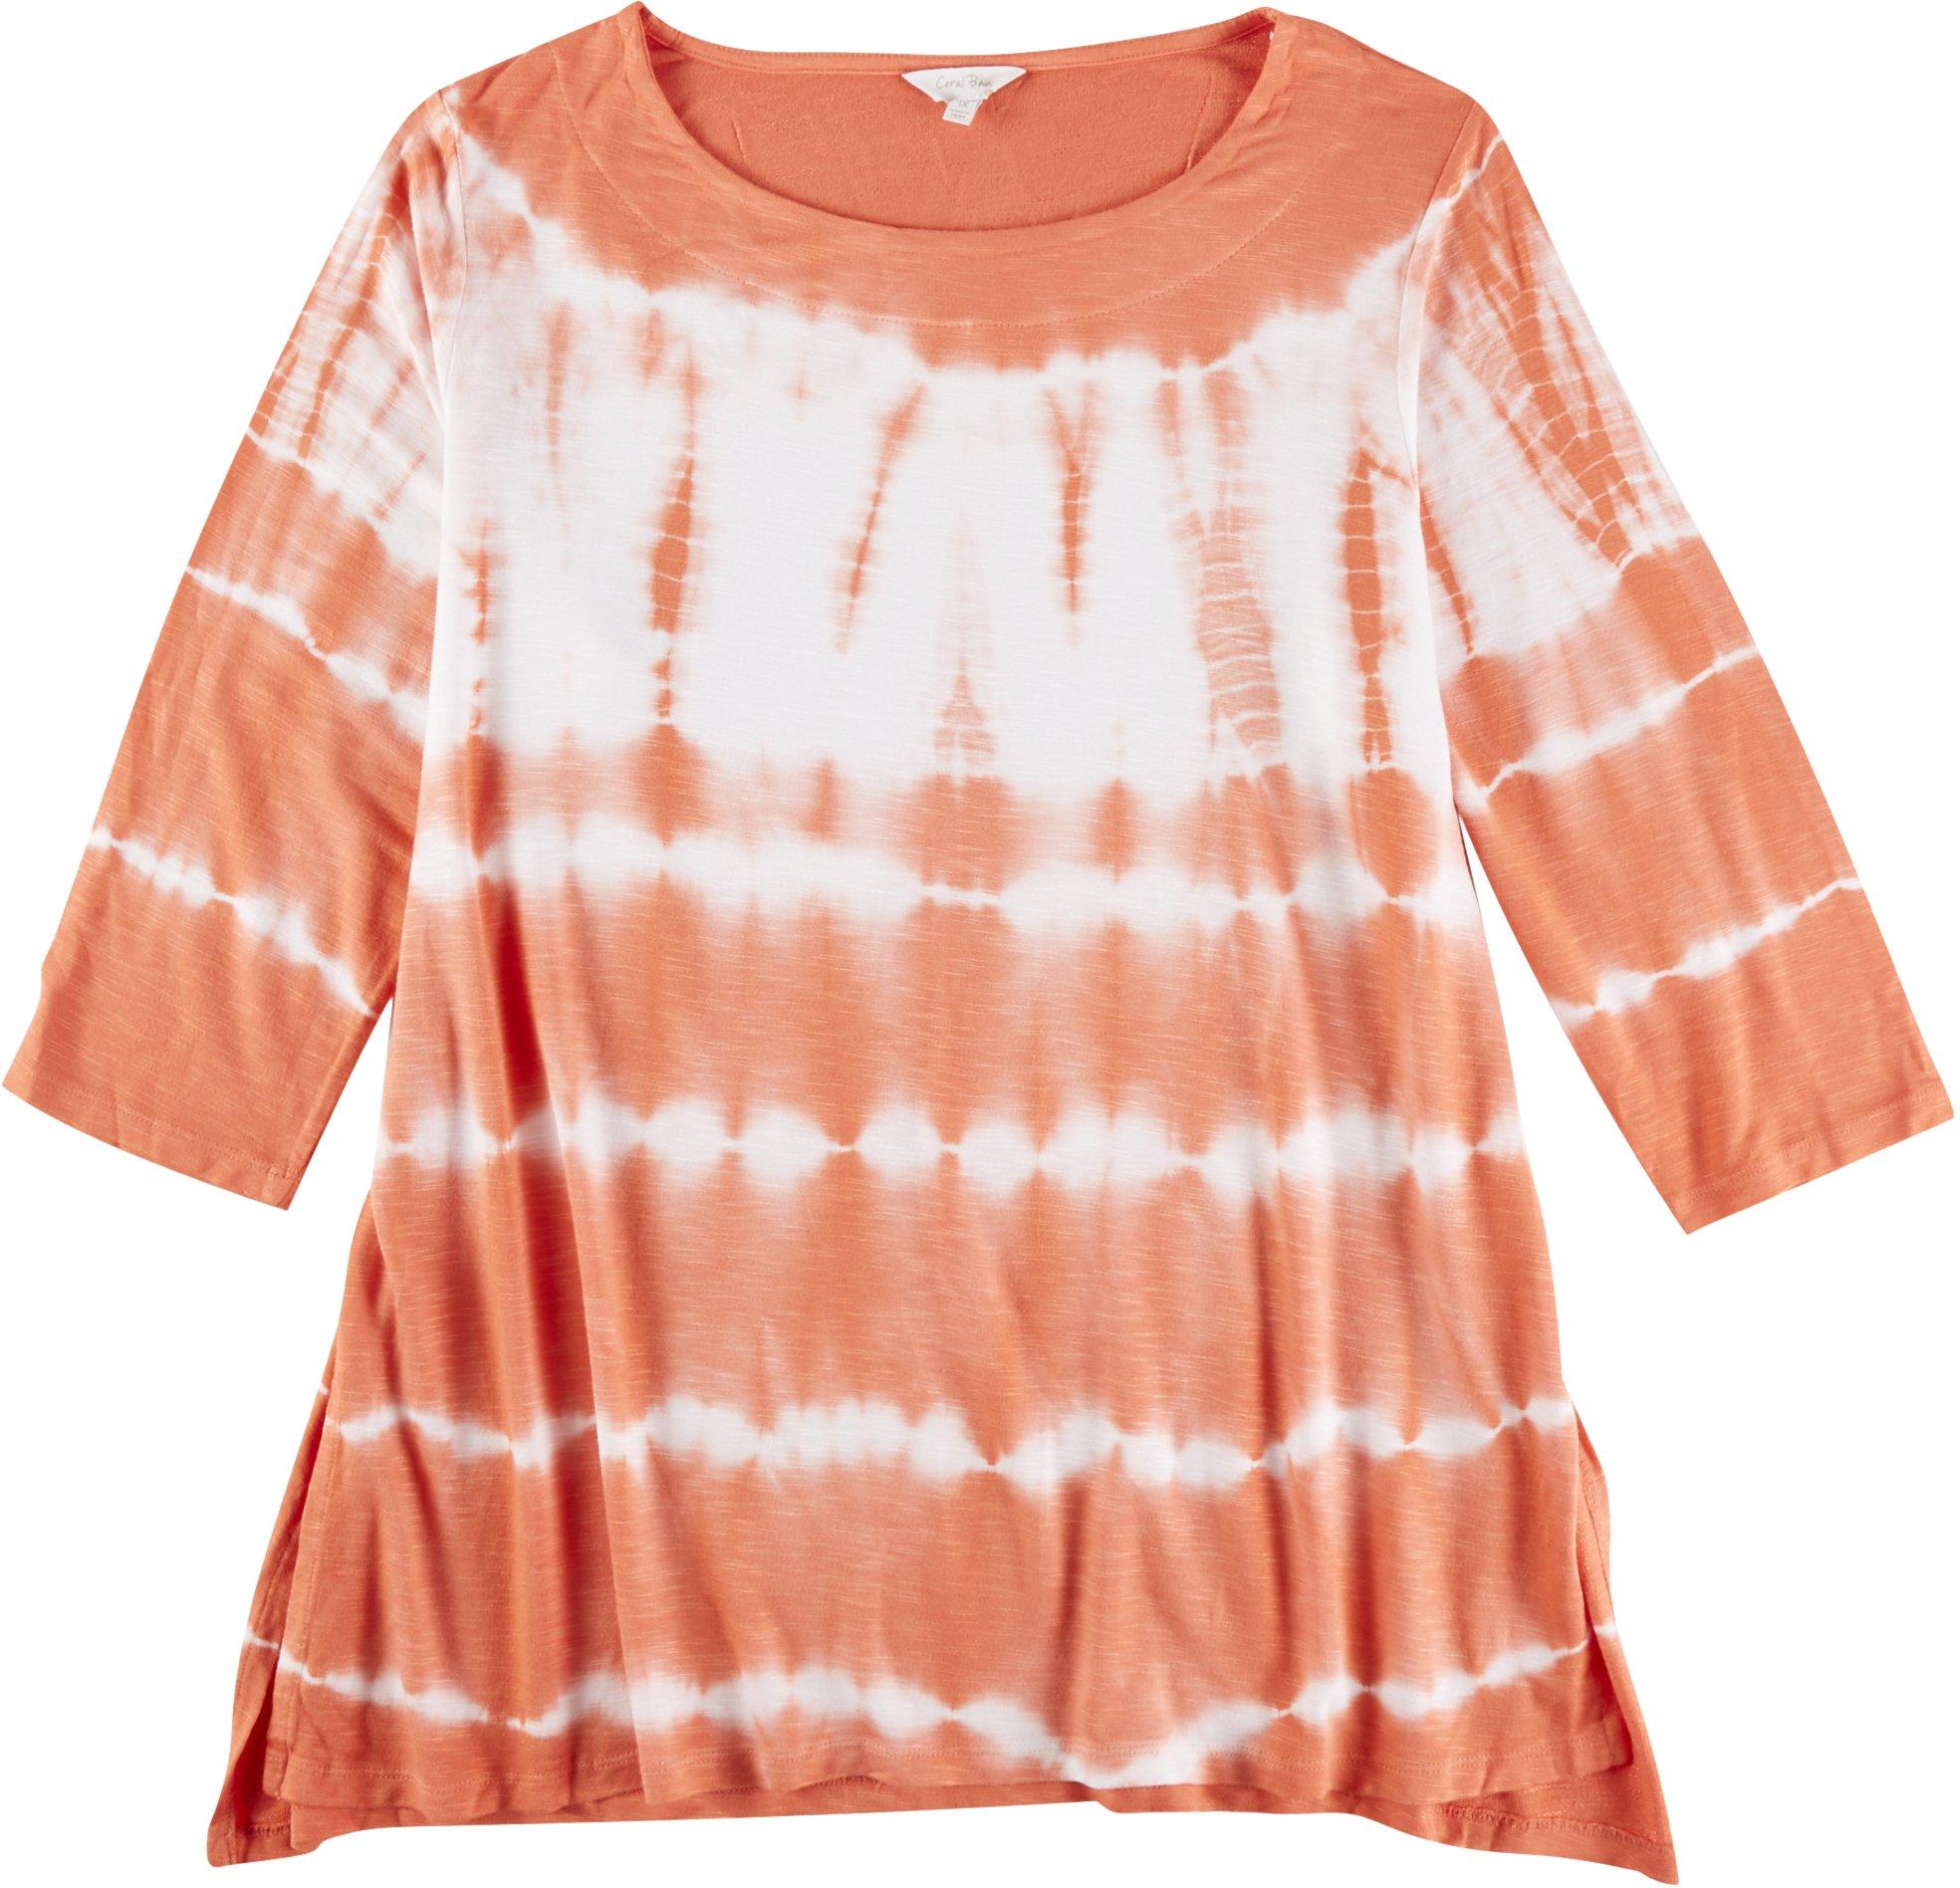 C COABALLA Abstract Composition,Womens Shirt 3//4 Sleeve Casual Tops Tee S-XXL with Paint Strokes and Splashes S